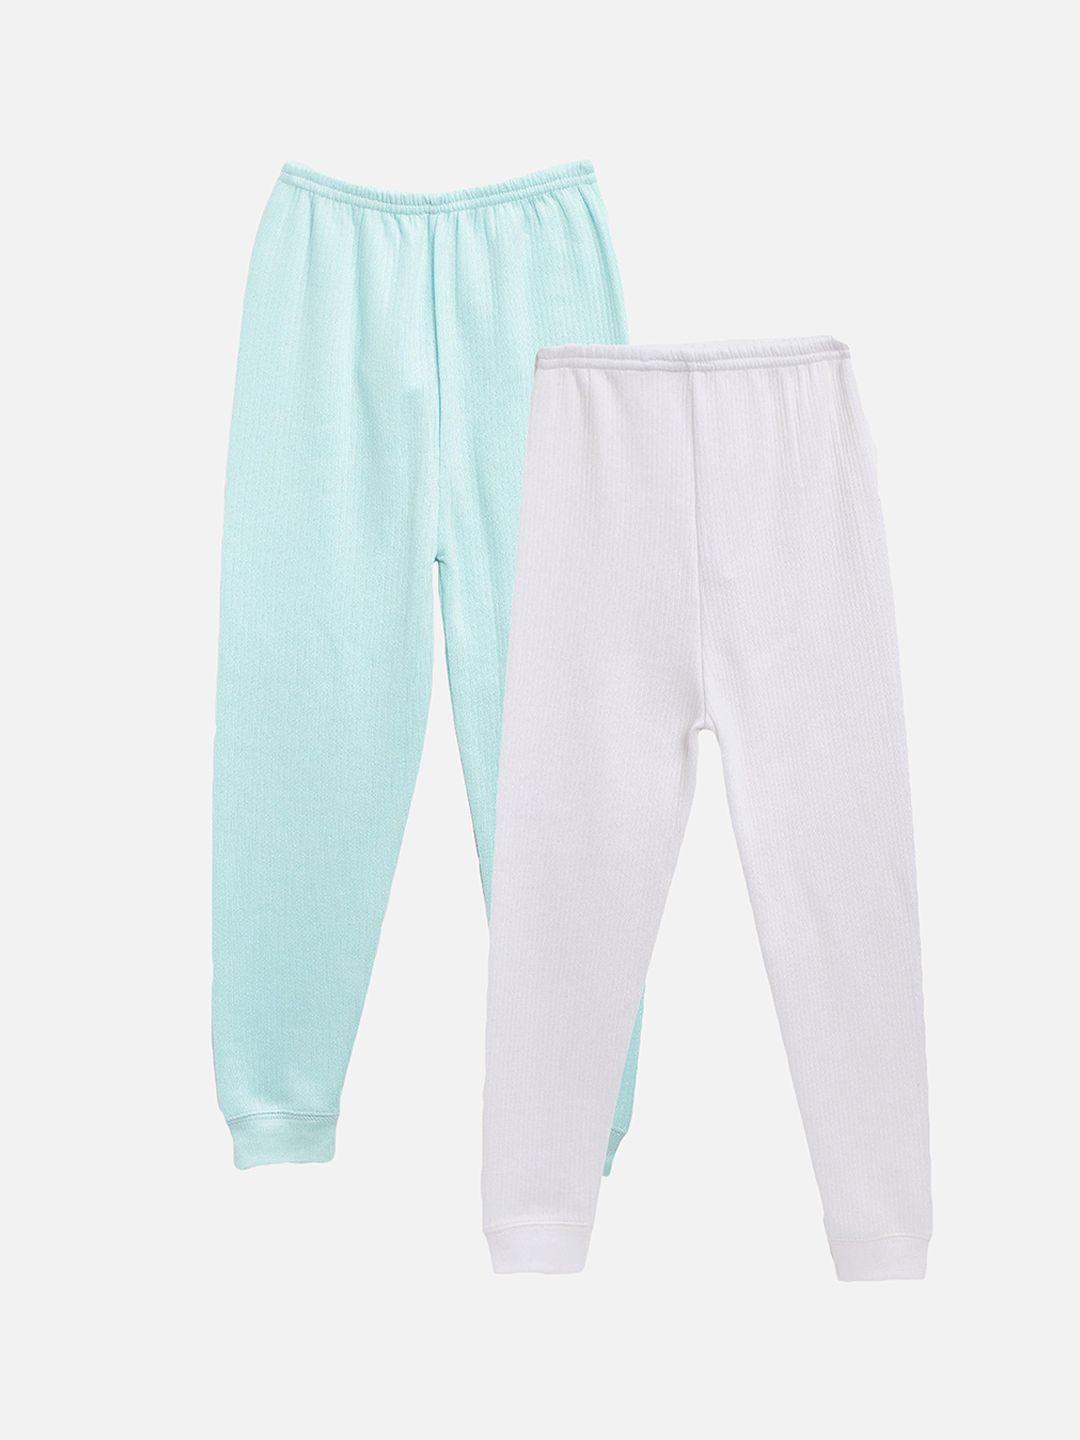 kanvin-boys-turquoise-blue-&-white-solid-thermal-bottoms